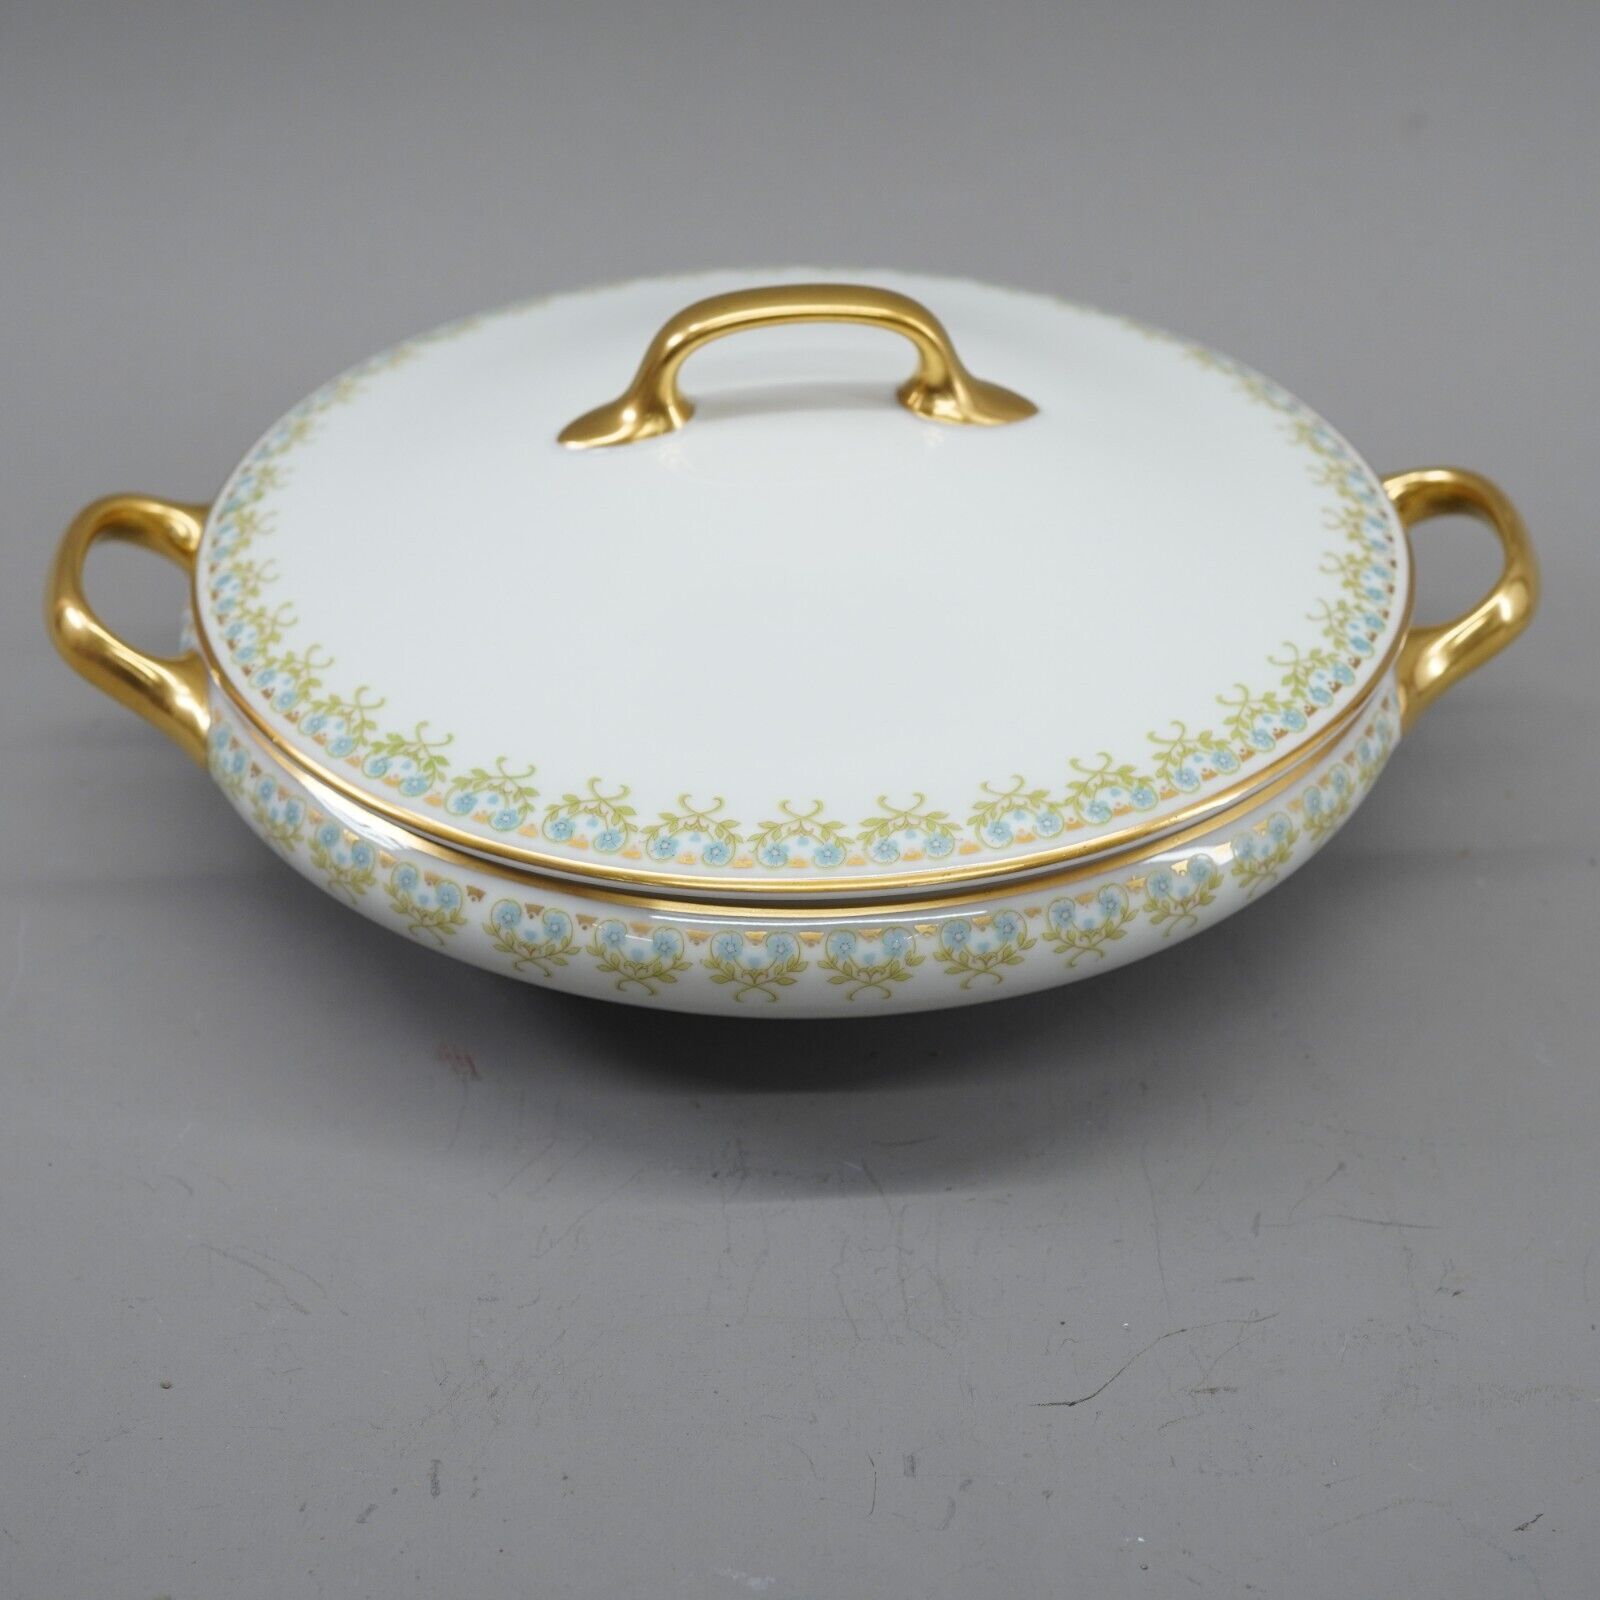 Limoges Old Abbey Covered Casserole Dish # 2 Fine China Gold Accents Made France